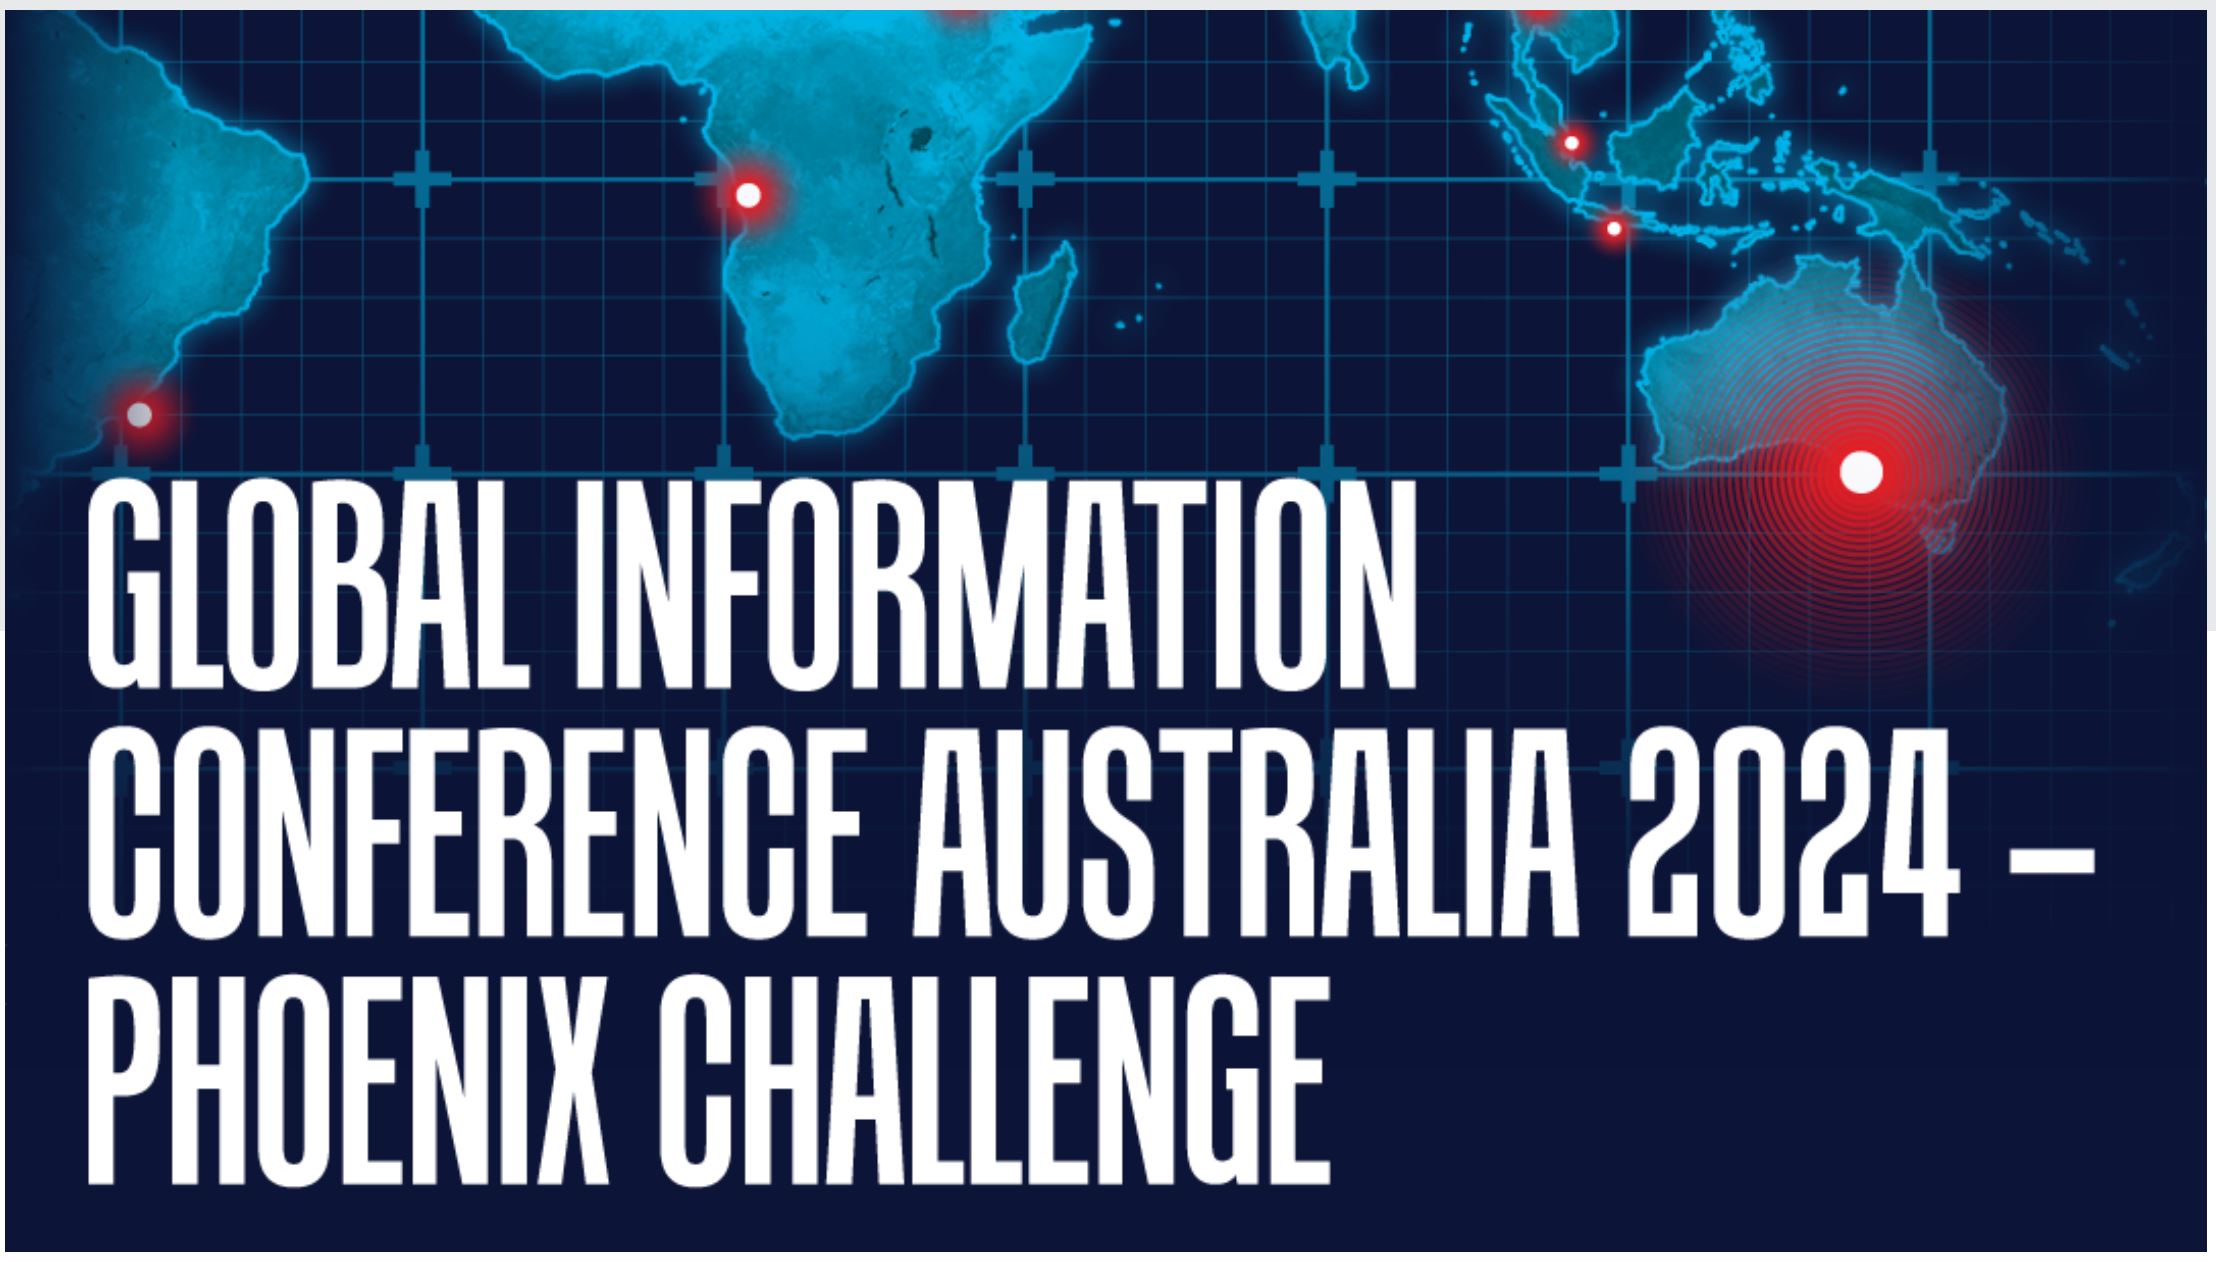 A map of the world with the words "Global Information Conference Australia 2024 - Phoenix Challenge" over it in white text